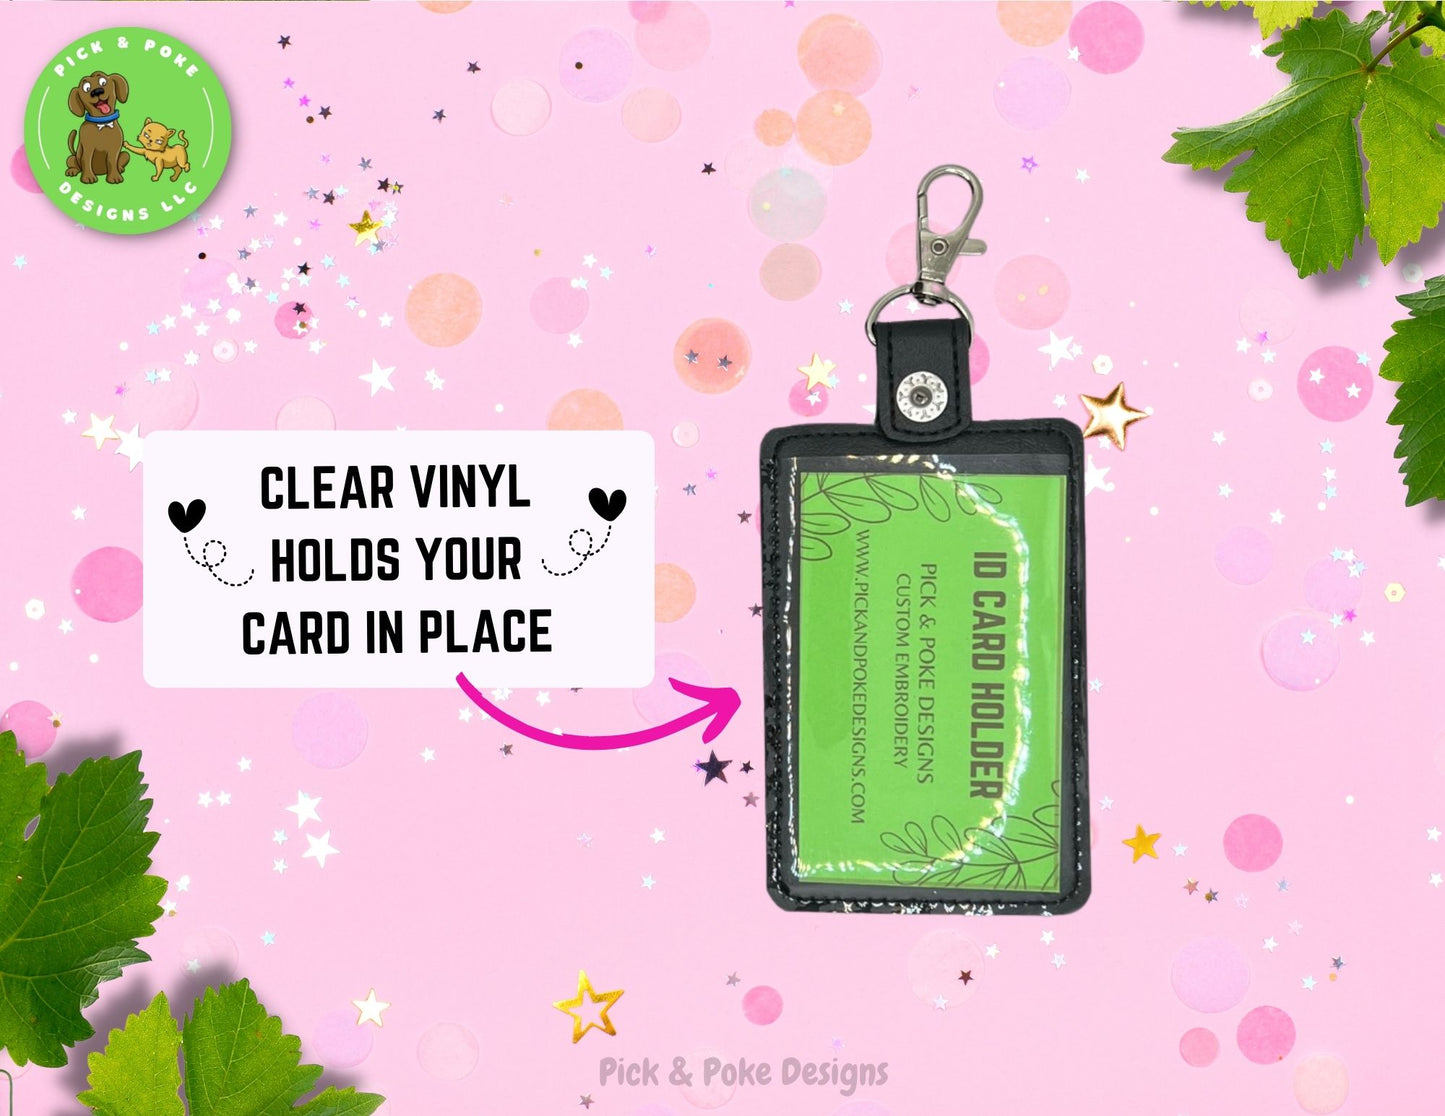 ID Badge Card Holder with Swivel Clip | Paw Print Design | Vertical Style Protector Case | Made to Order